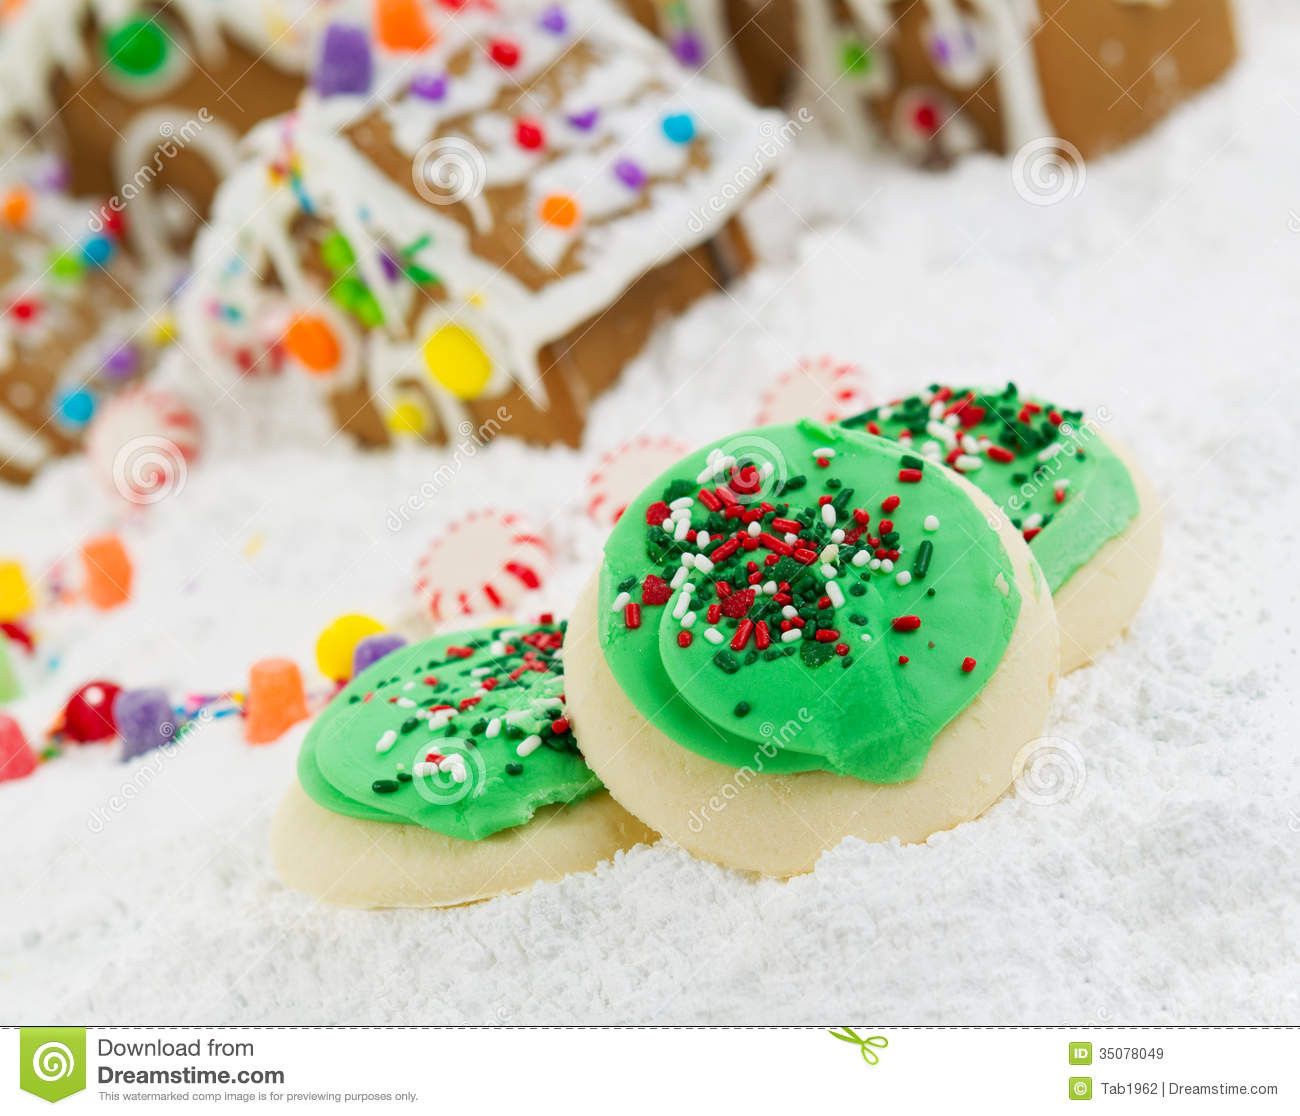 Frosted Christmas Cookies
 Frosted Holiday Cookies For The Season Joy Royalty Free